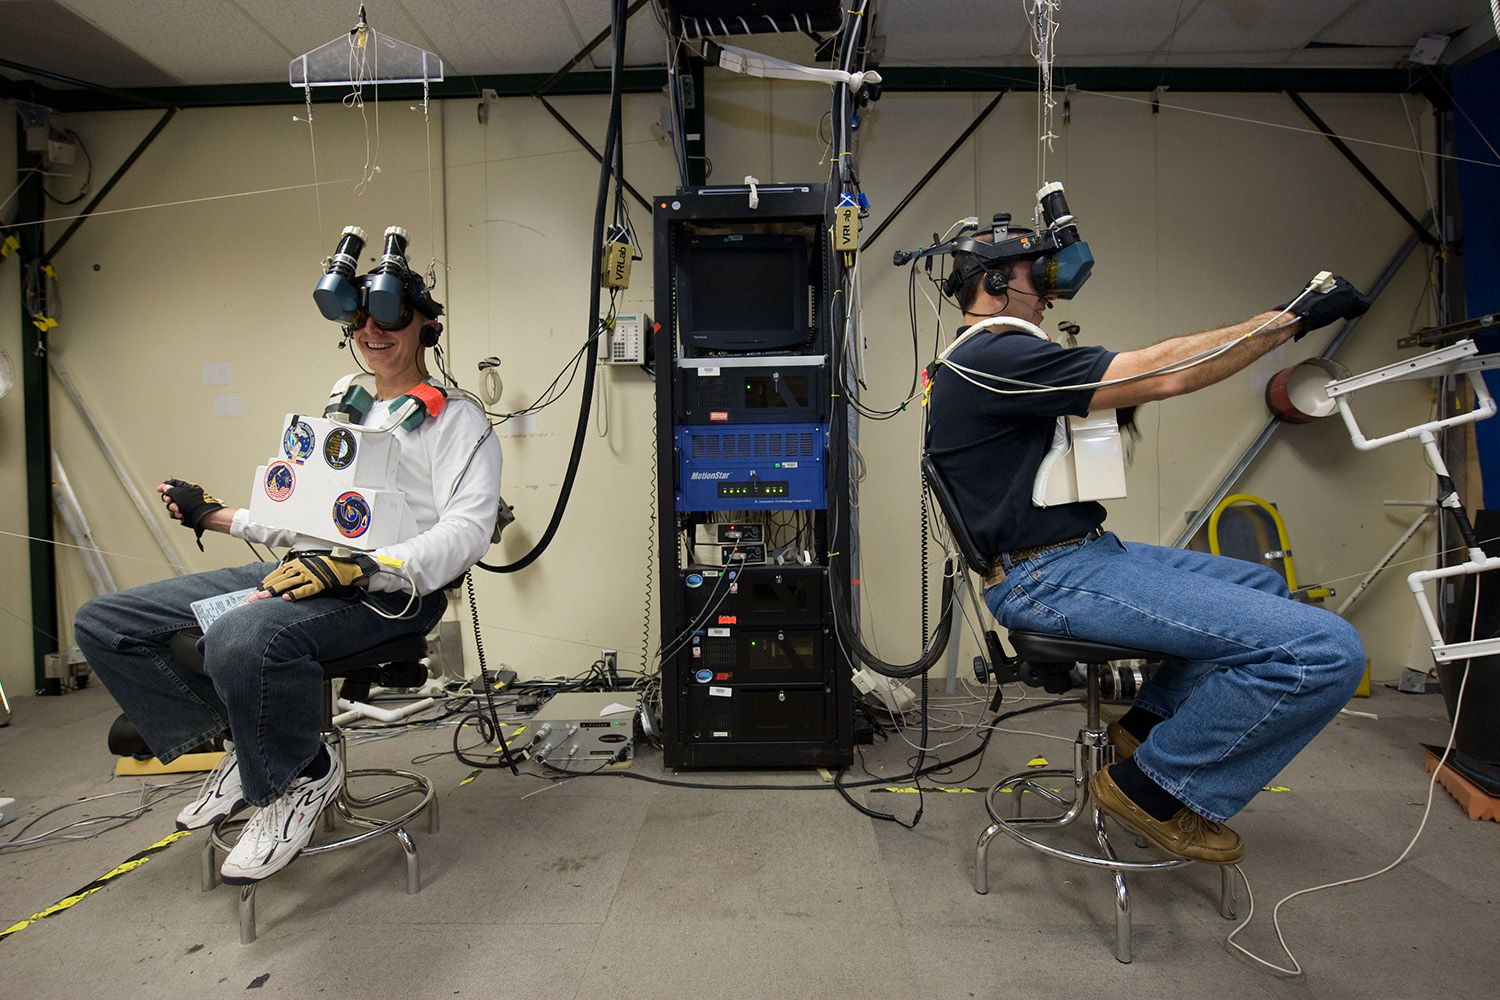 NASA Explores Virtual and Augmented Realities for Science and Engineering | Digital Trends